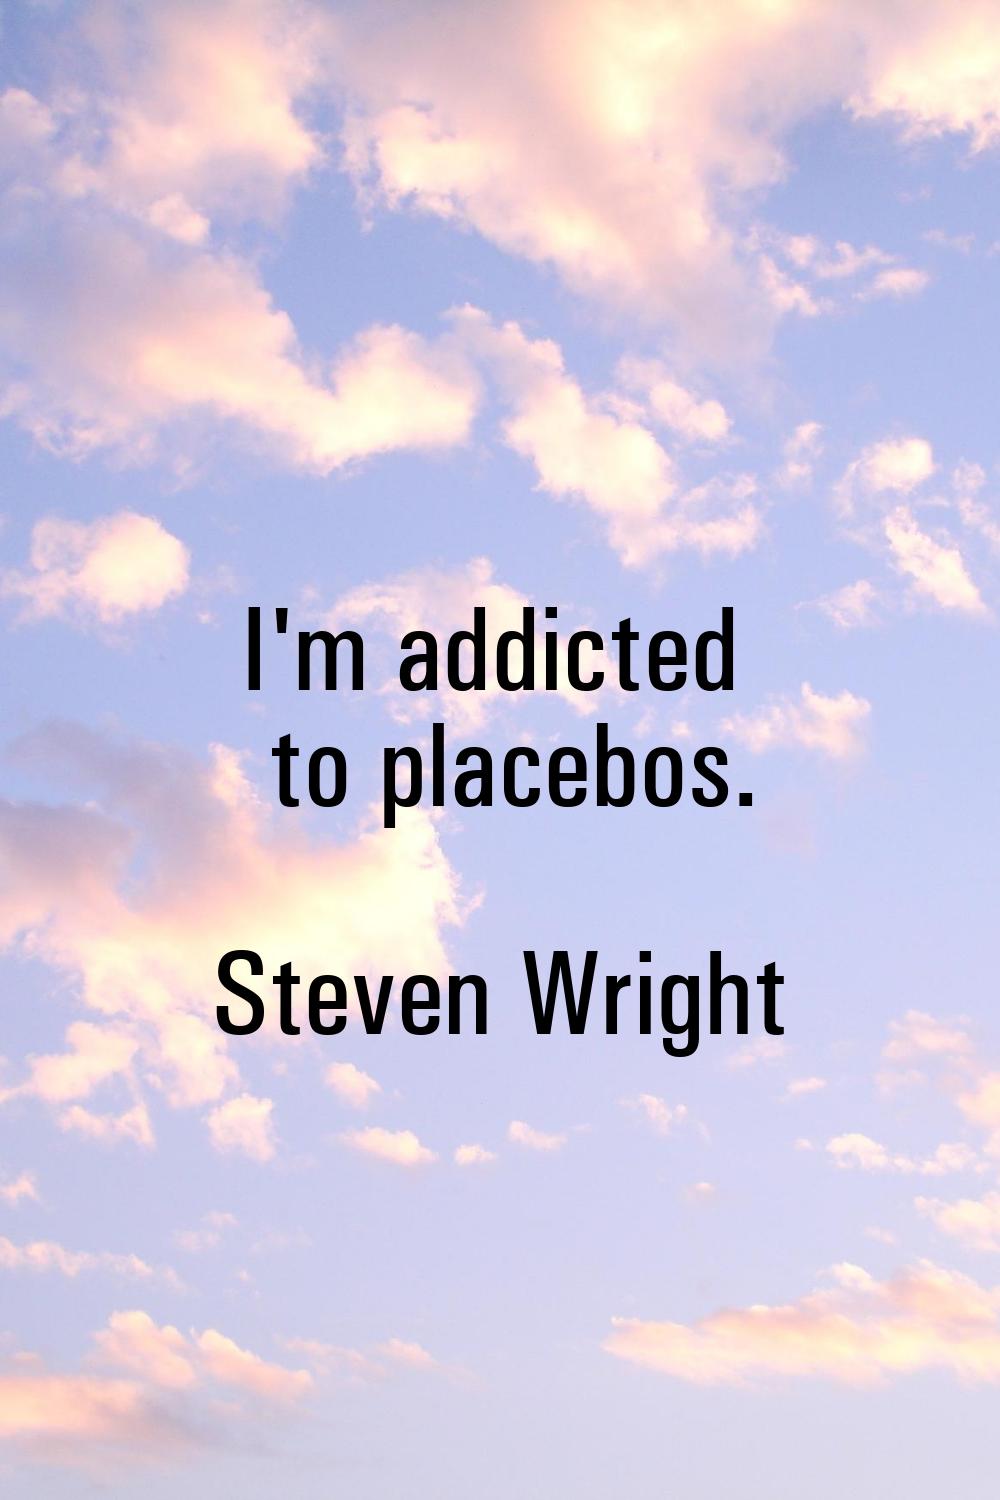 I'm addicted to placebos.